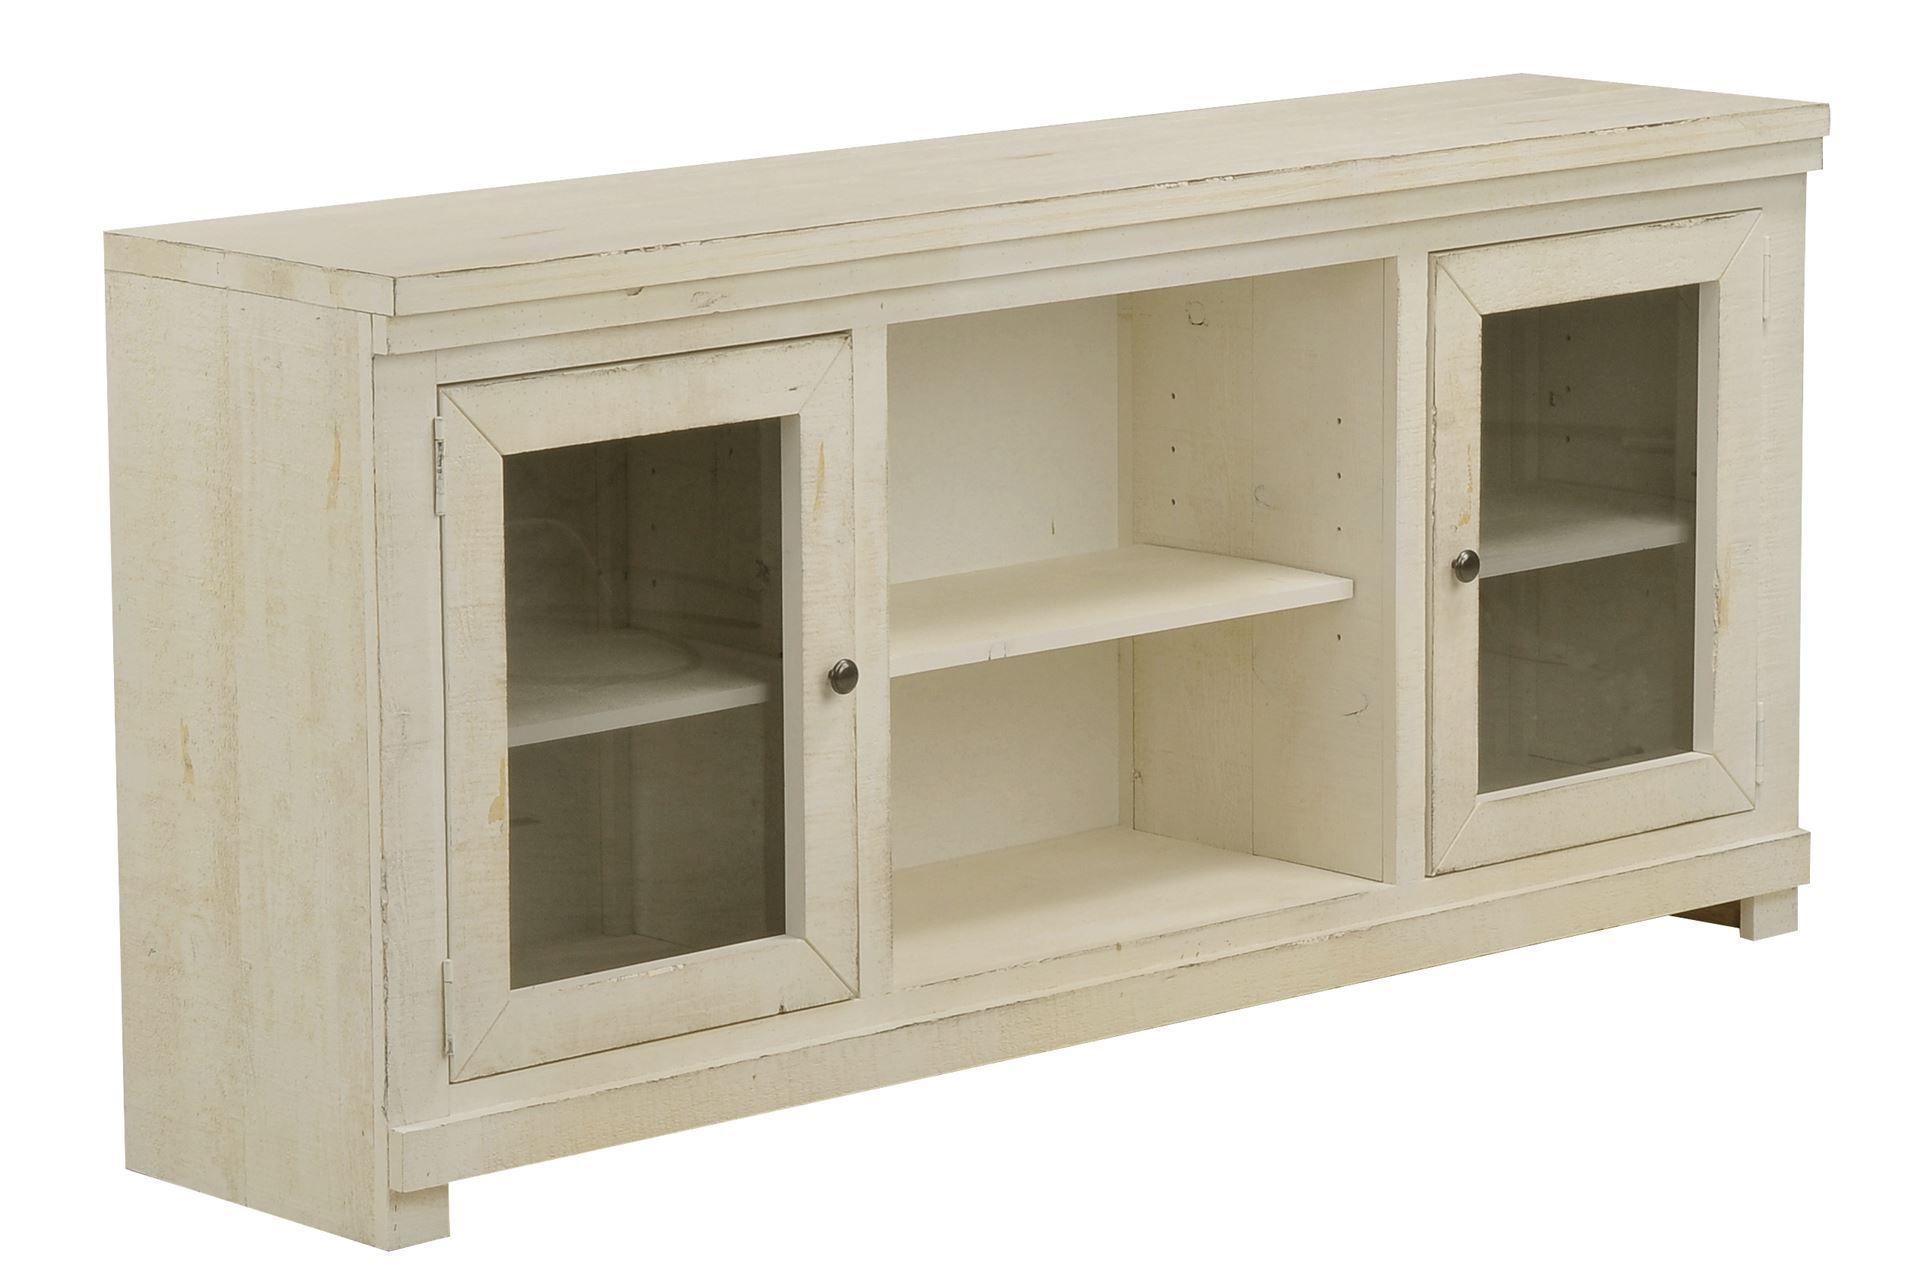 Sinclair White 68 Inch Tv Stand | For The Home | Living Room Designs Within Sinclair White 68 Inch Tv Stands (View 1 of 30)